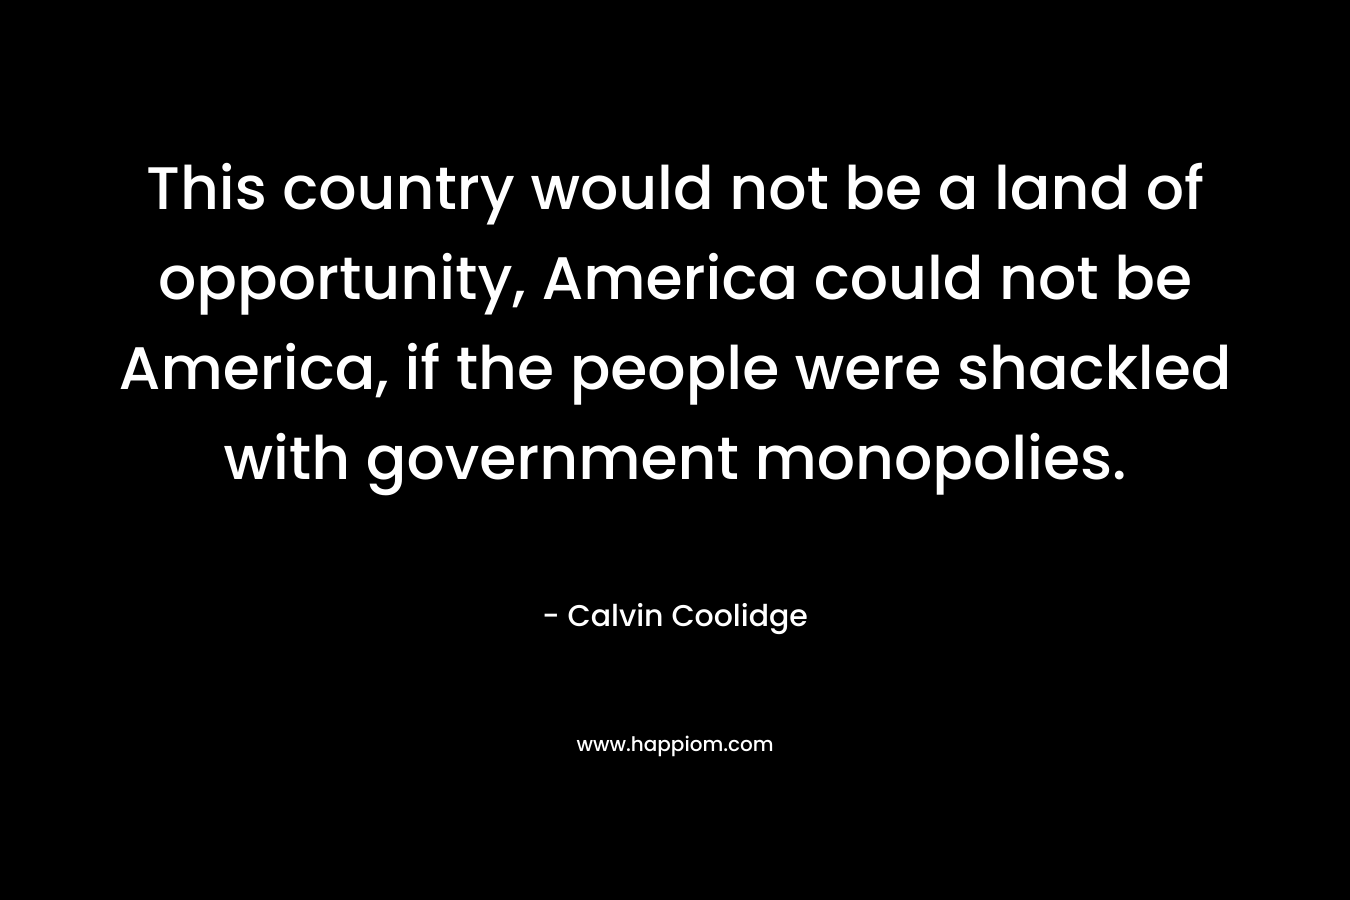 This country would not be a land of opportunity, America could not be America, if the people were shackled with government monopolies.